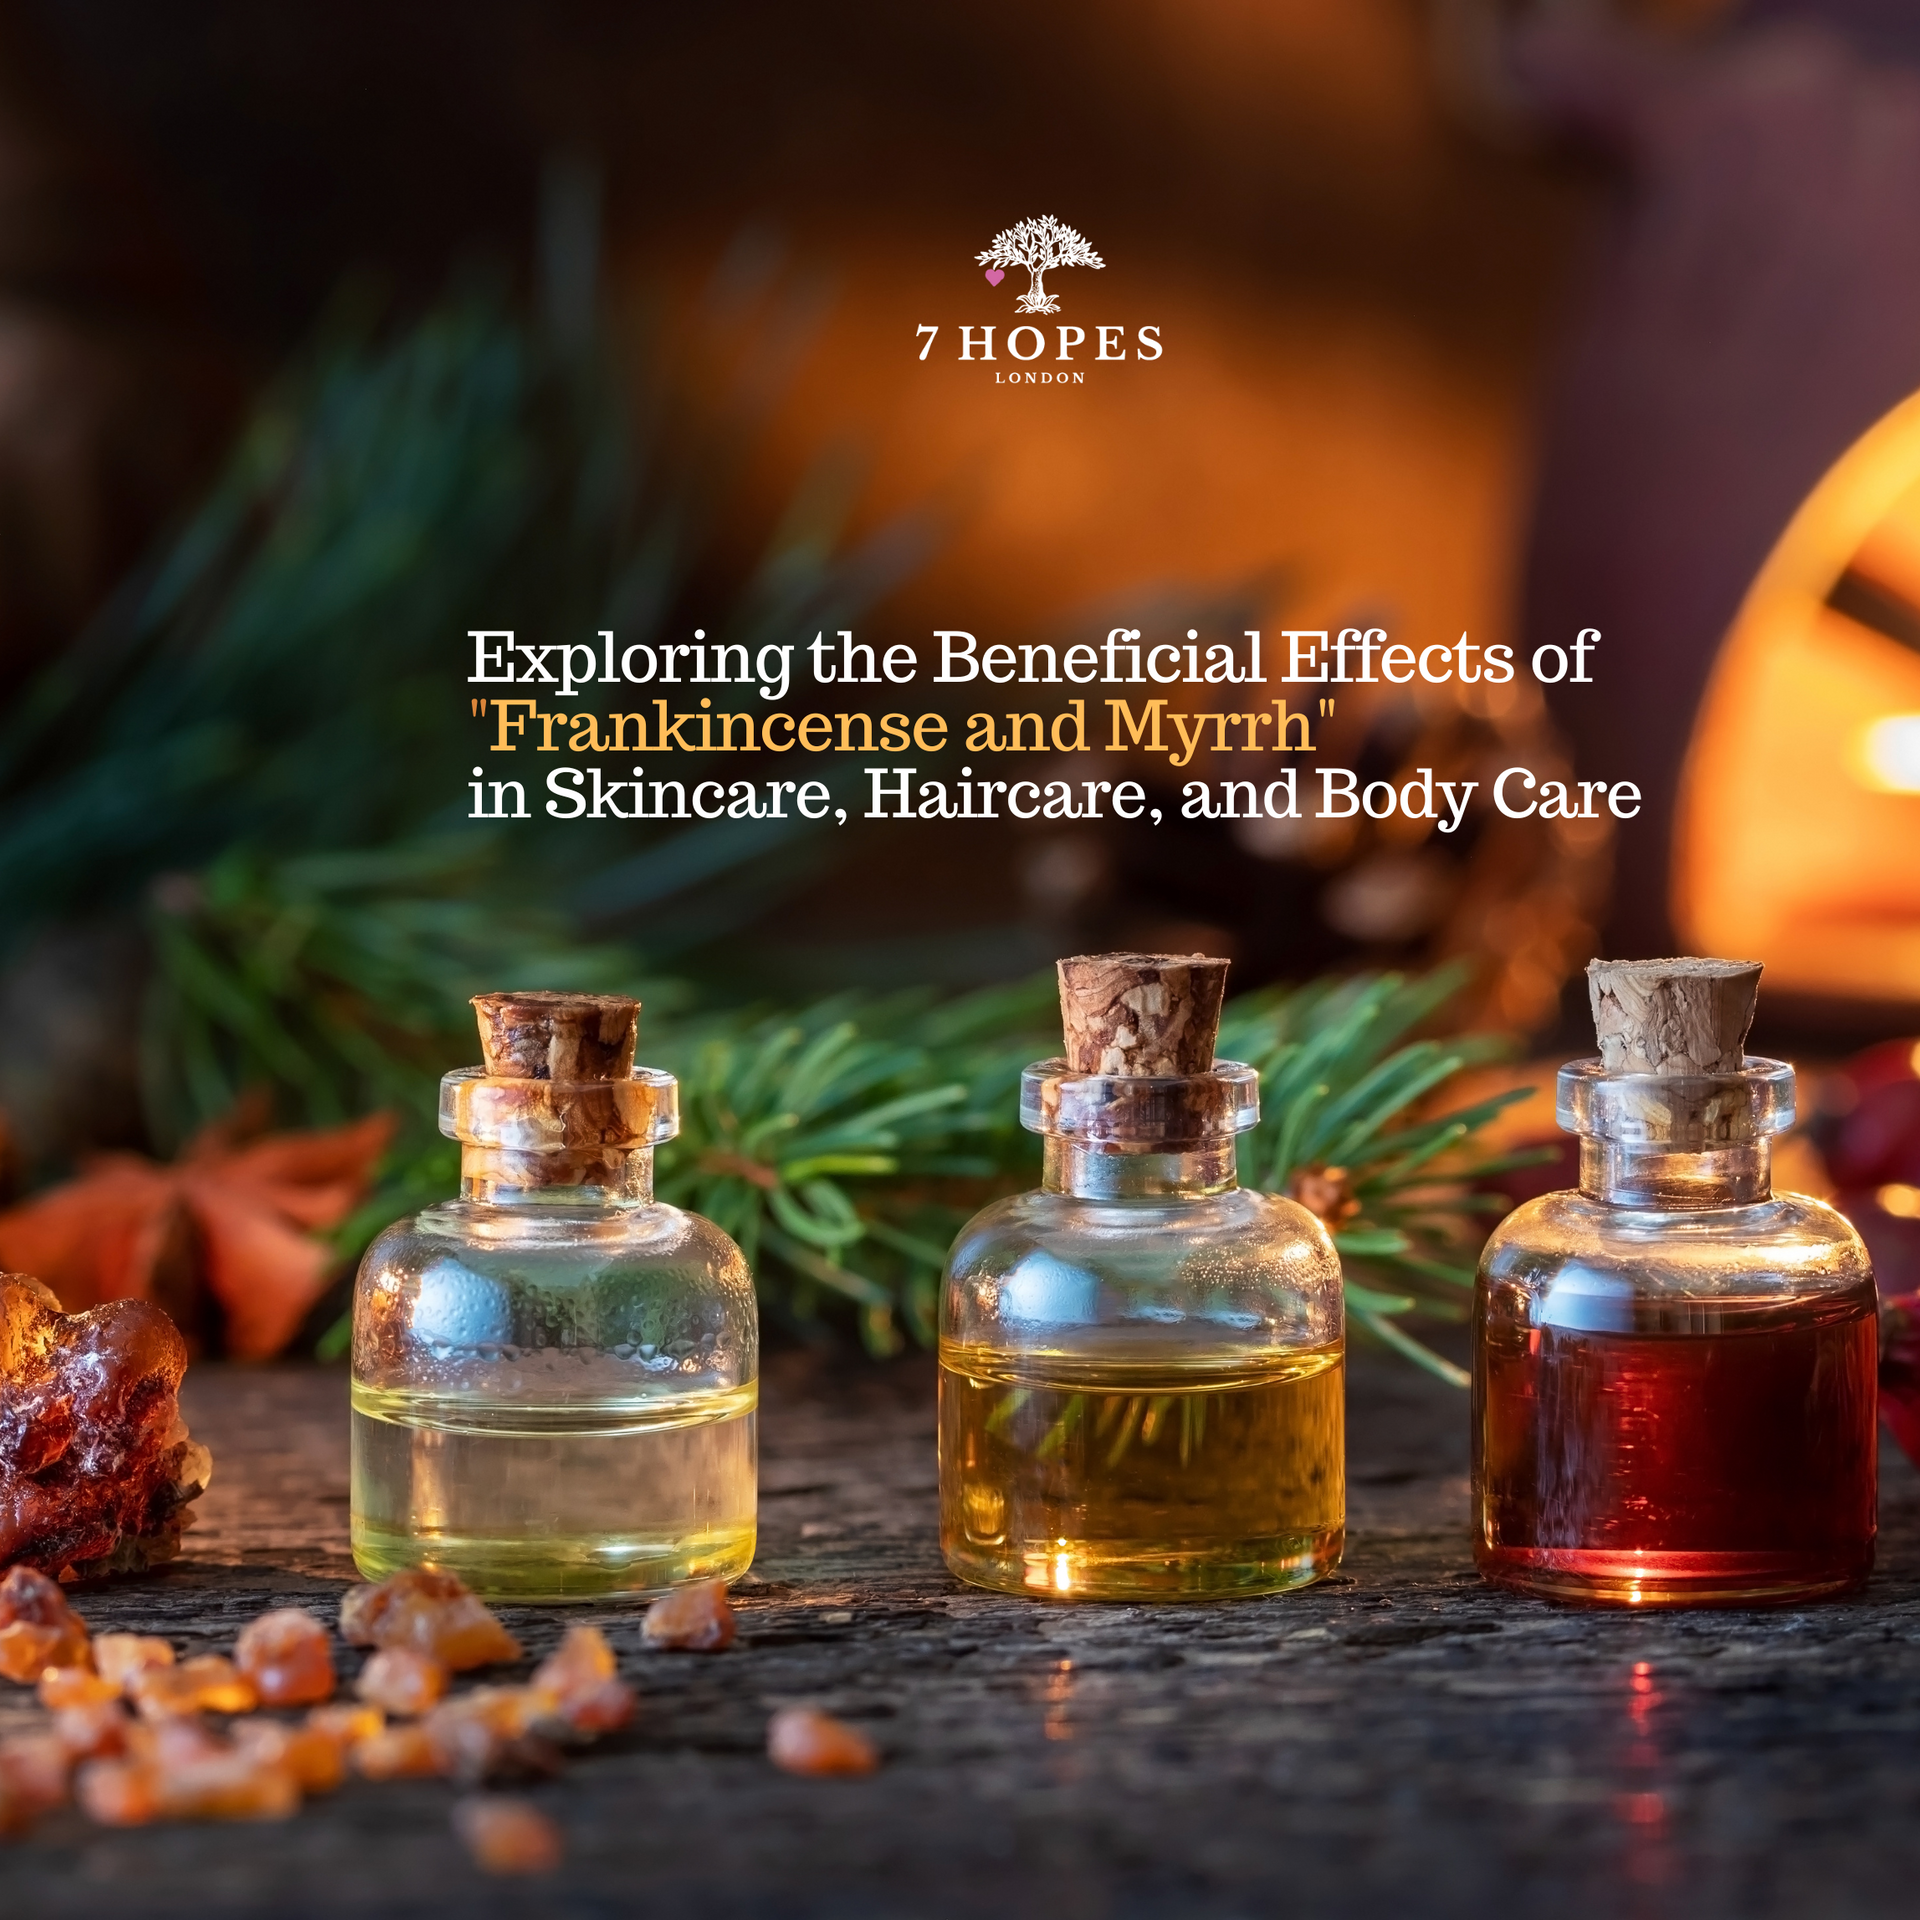 Exploring the Beneficial Effects of Frankincense and Myrrh in Skincare, Haircare, and Body Care